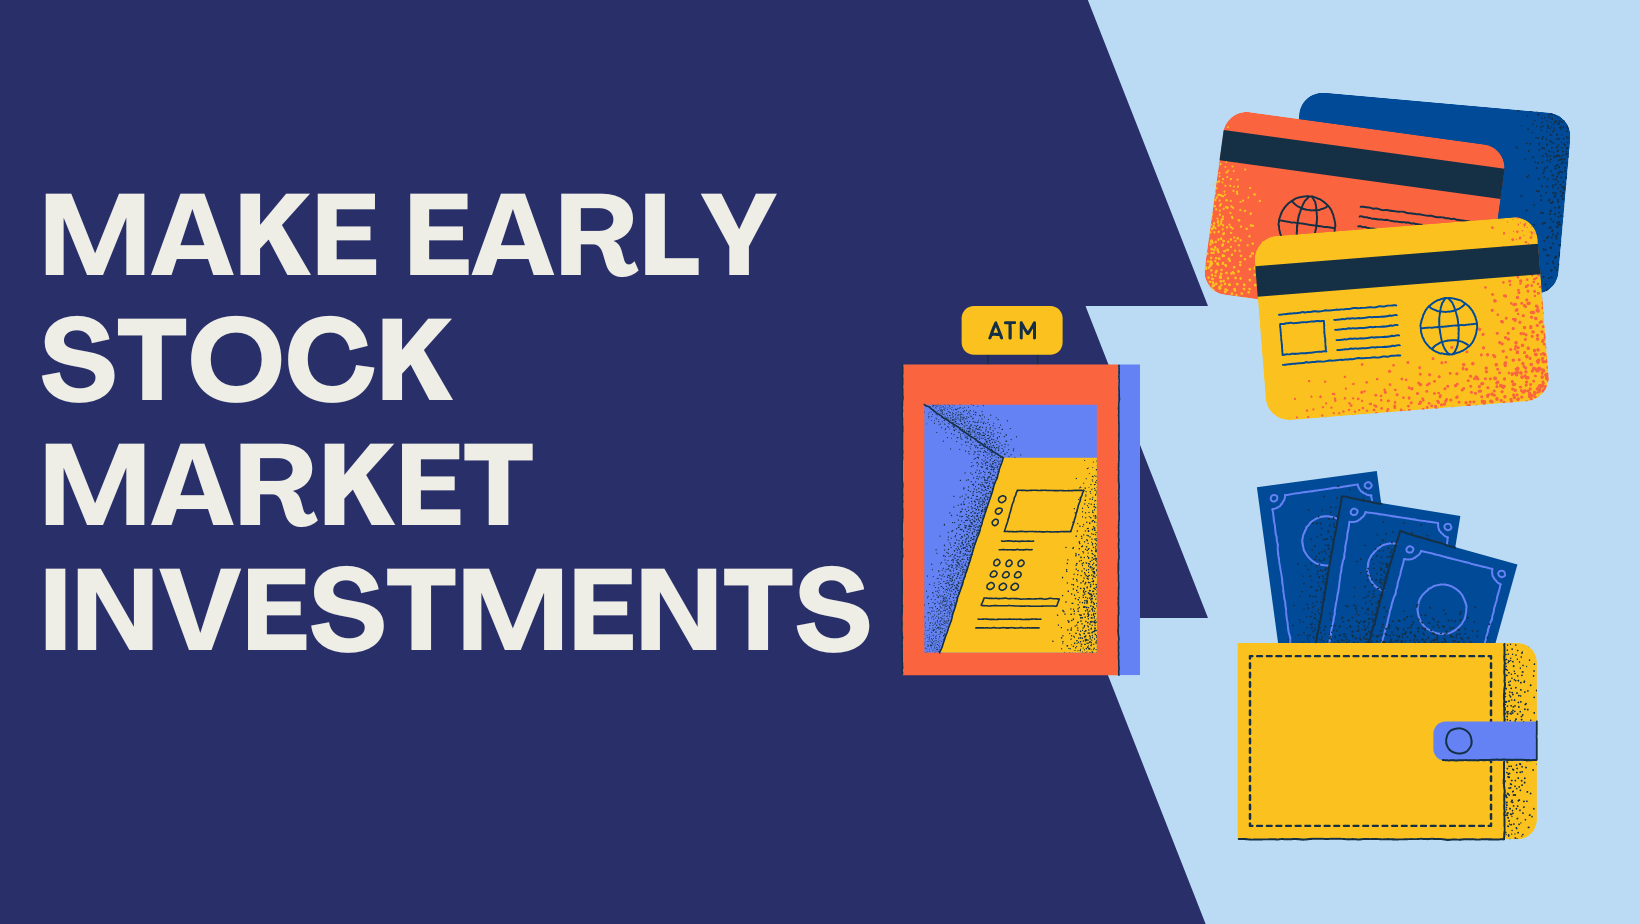 Make early stock market investments